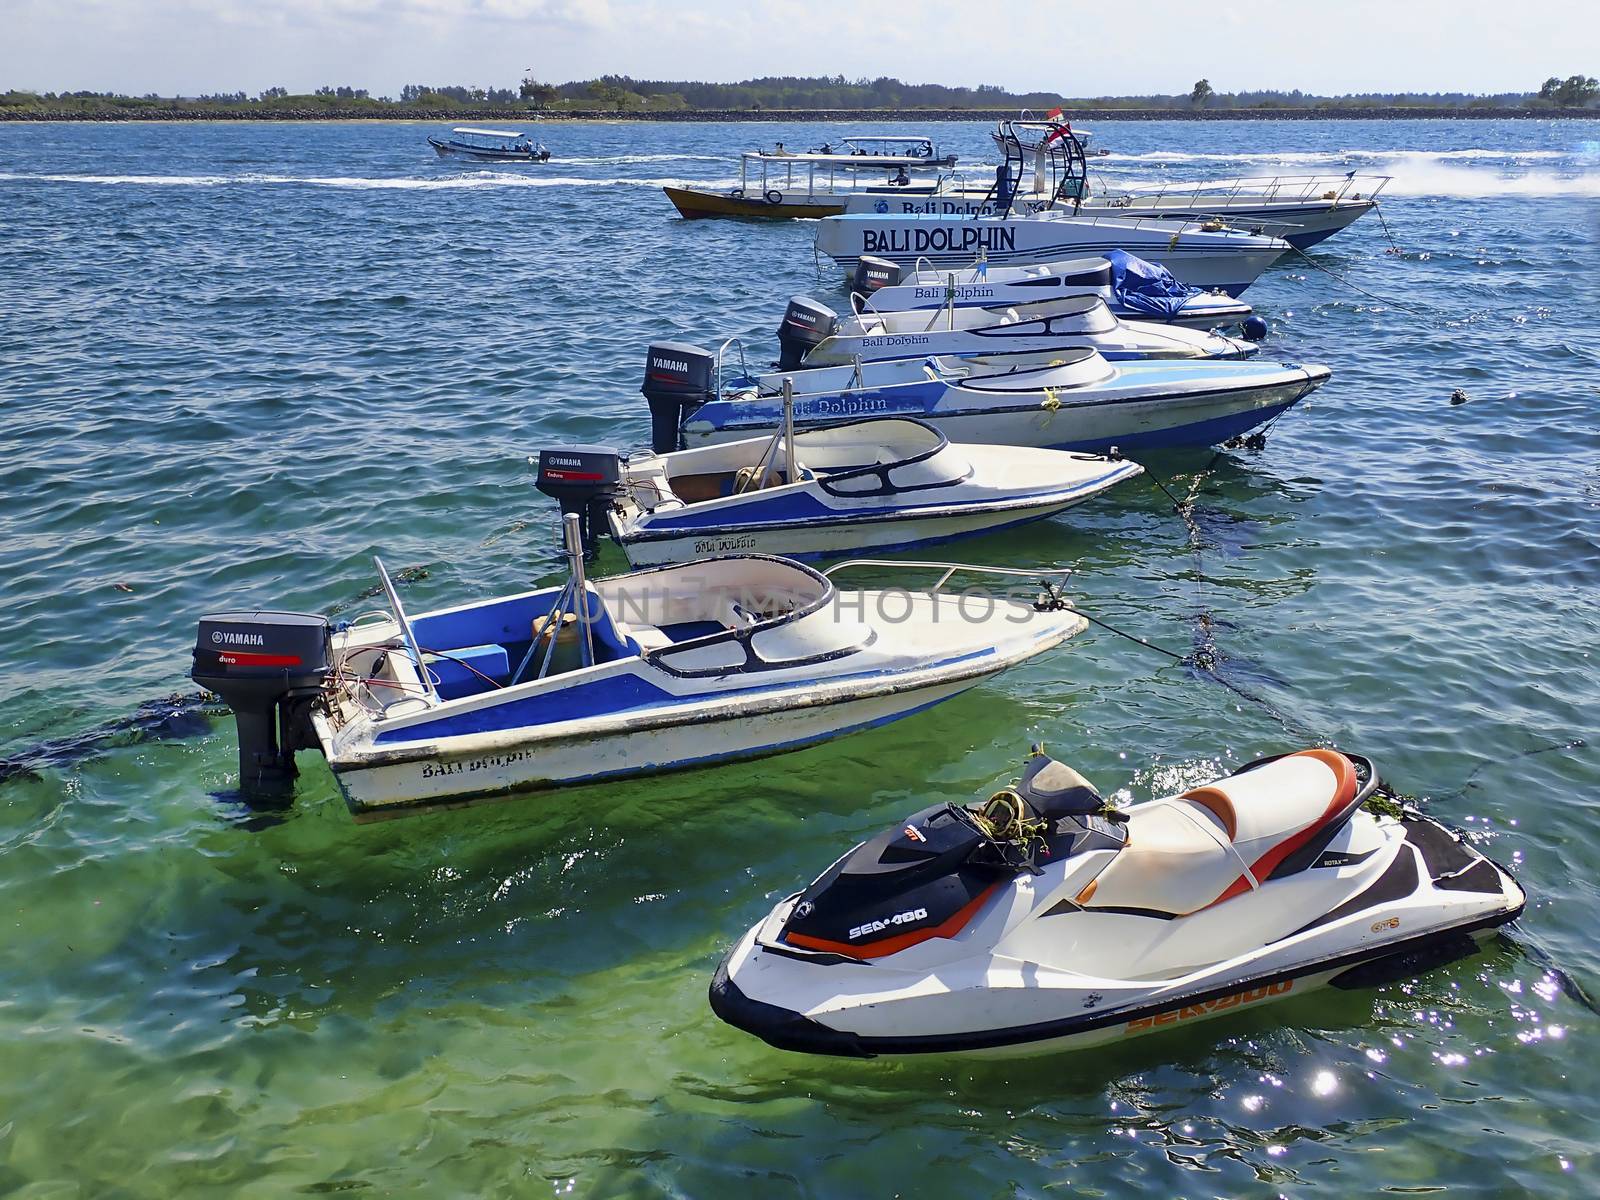 Bali Water sports vehicle and tourism package in Indonesia by silverwings